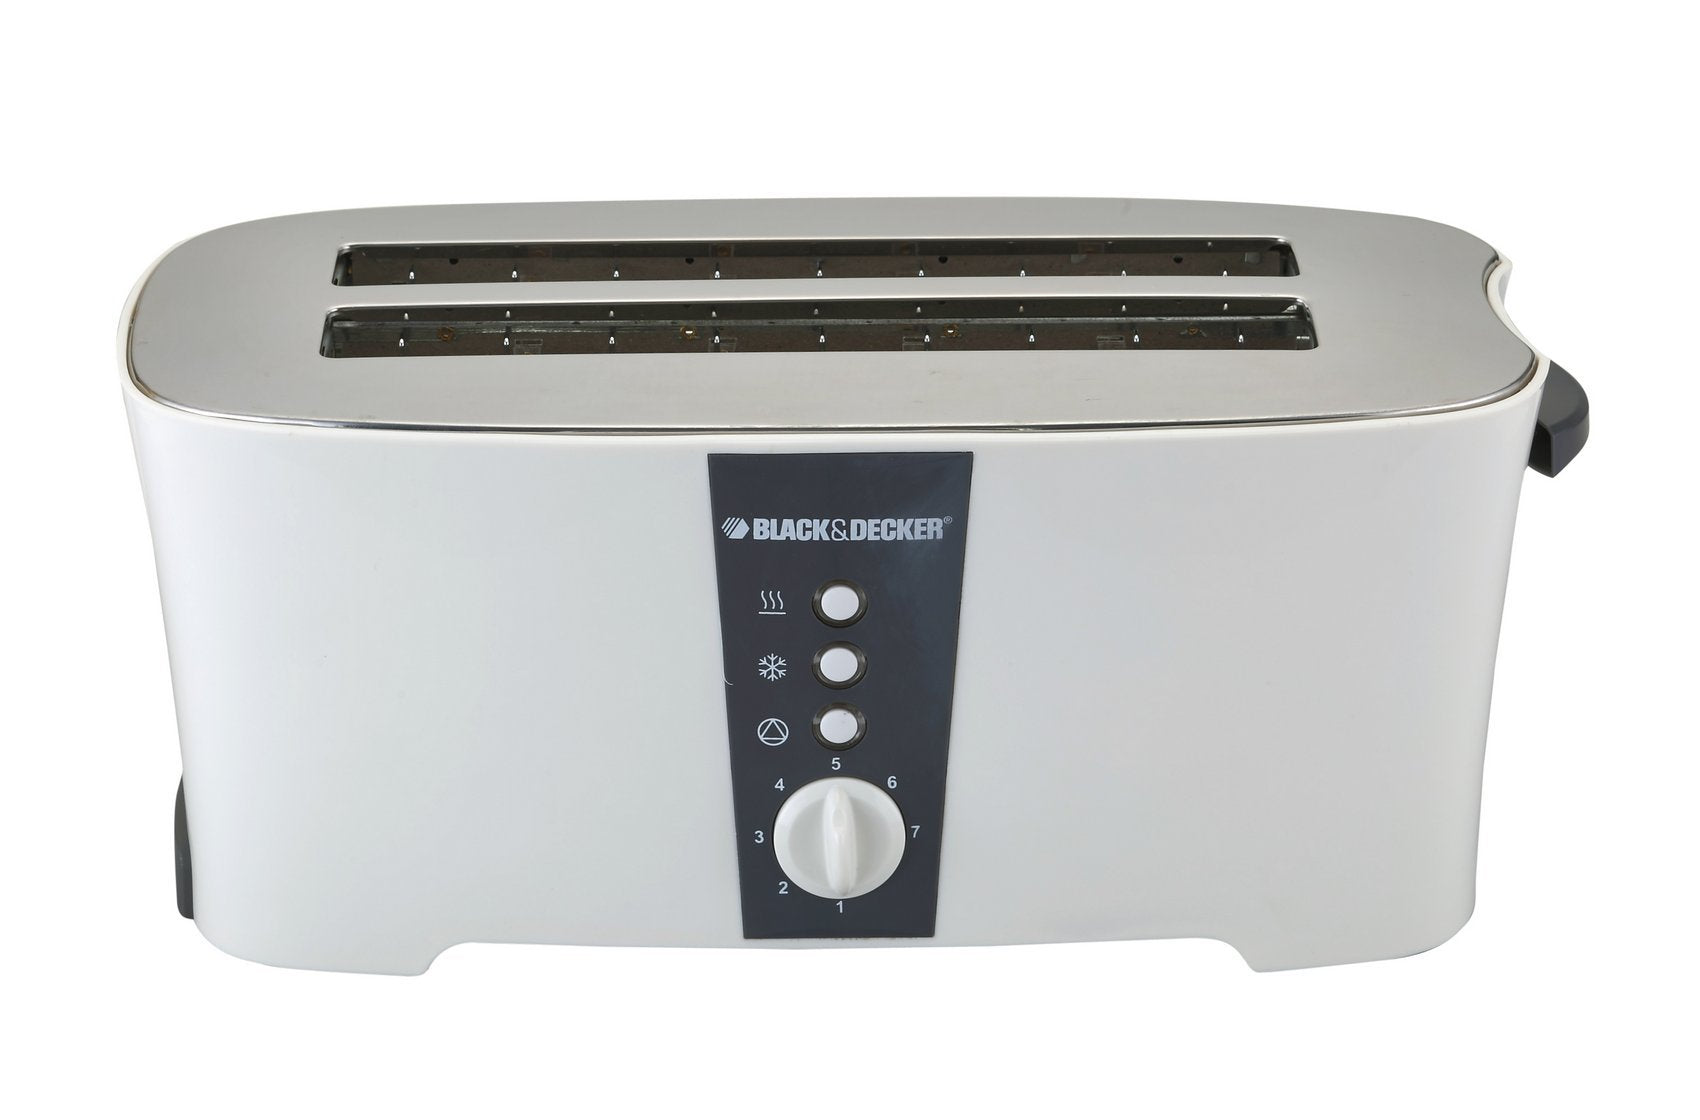 BLACK+DECKER 1350W 4 Slice cool touch Toaster with Electronic Browning Control White ET124-B5